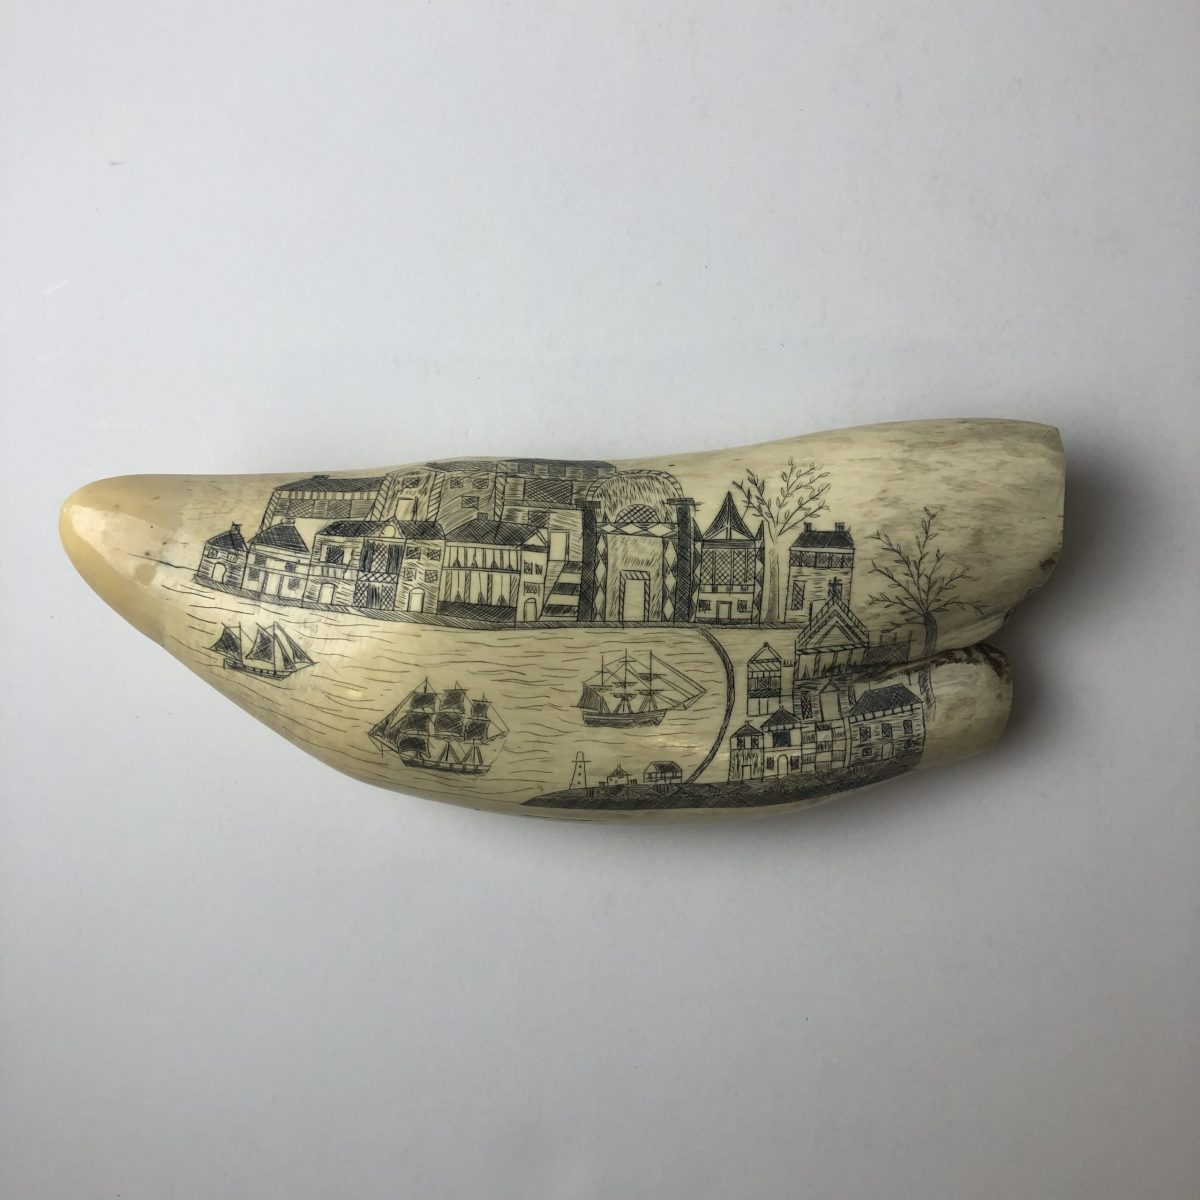 Whale Tooth, ca. 1850